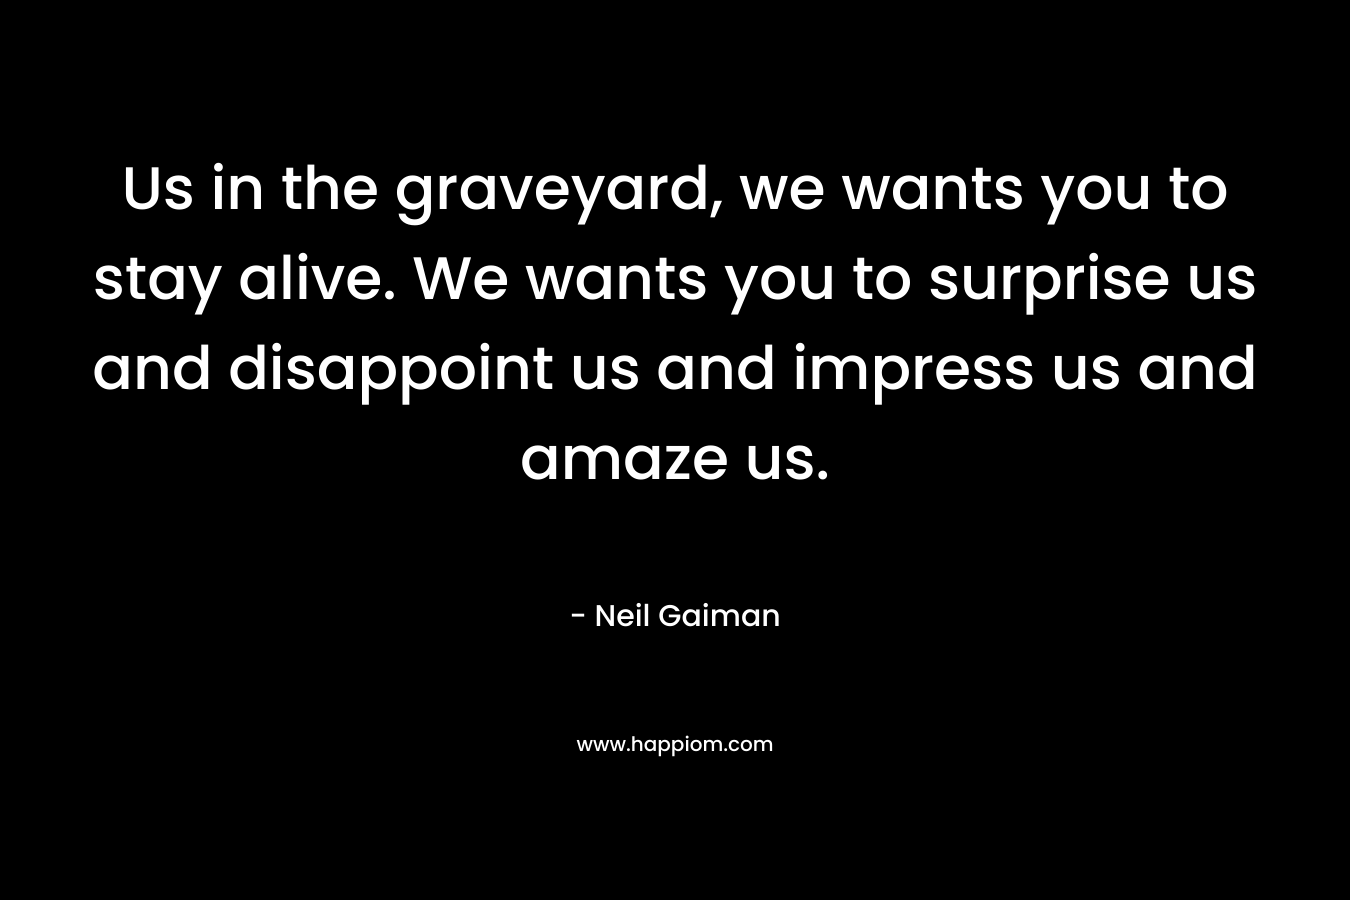 Us in the graveyard, we wants you to stay alive. We wants you to surprise us and disappoint us and impress us and amaze us. – Neil Gaiman